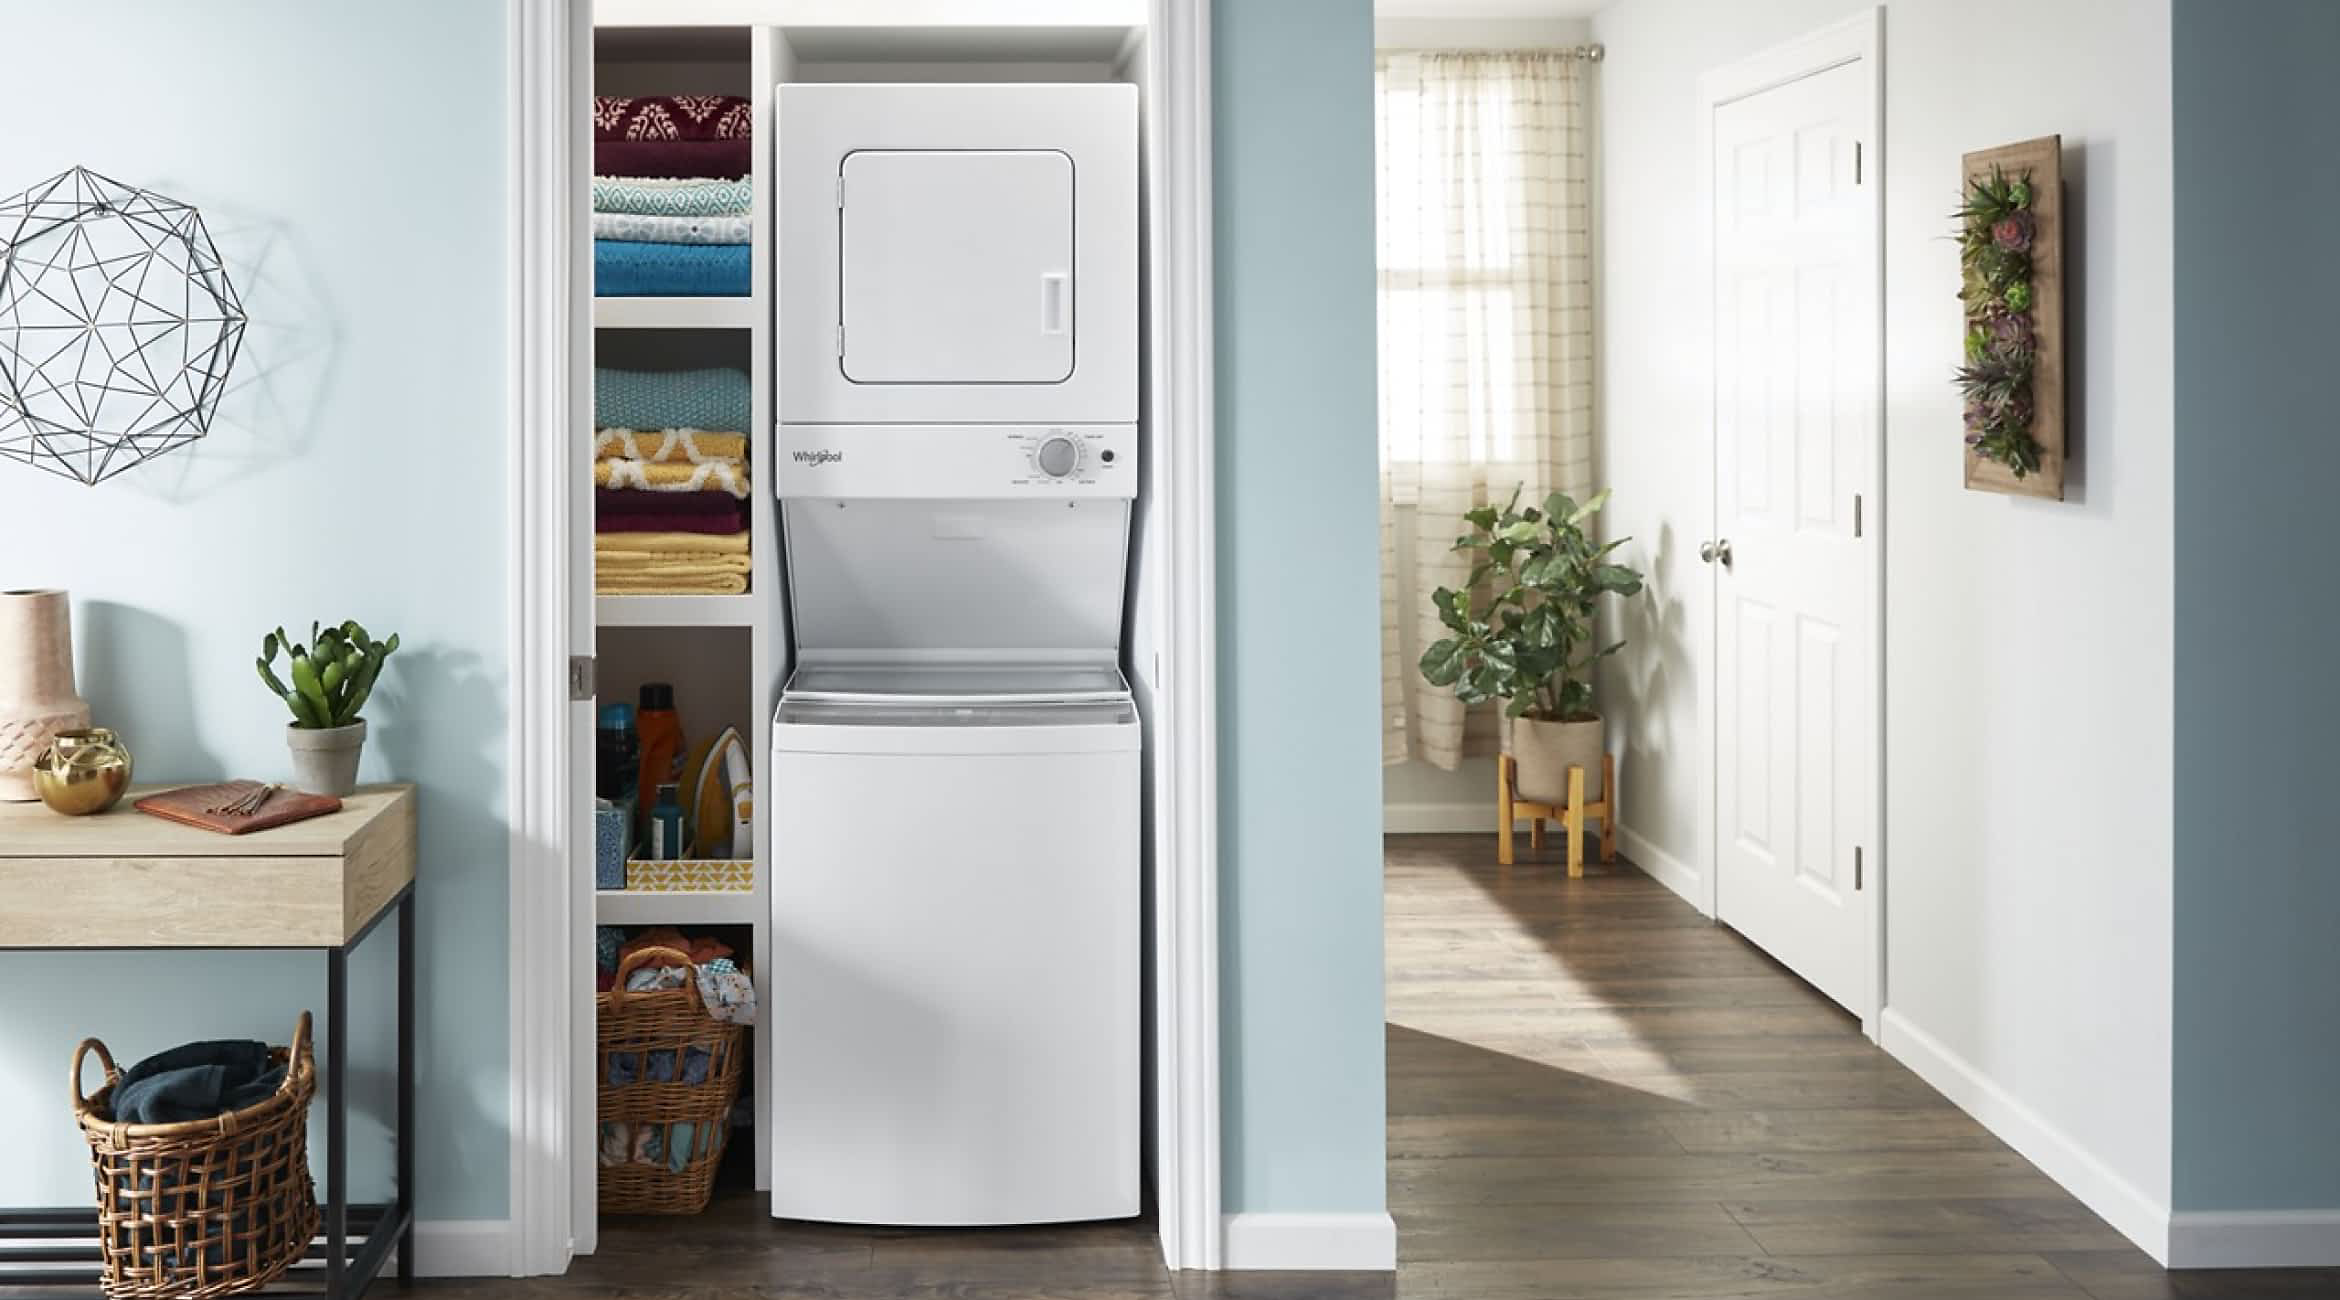 A Whirlpool® Stacked Laundry Center